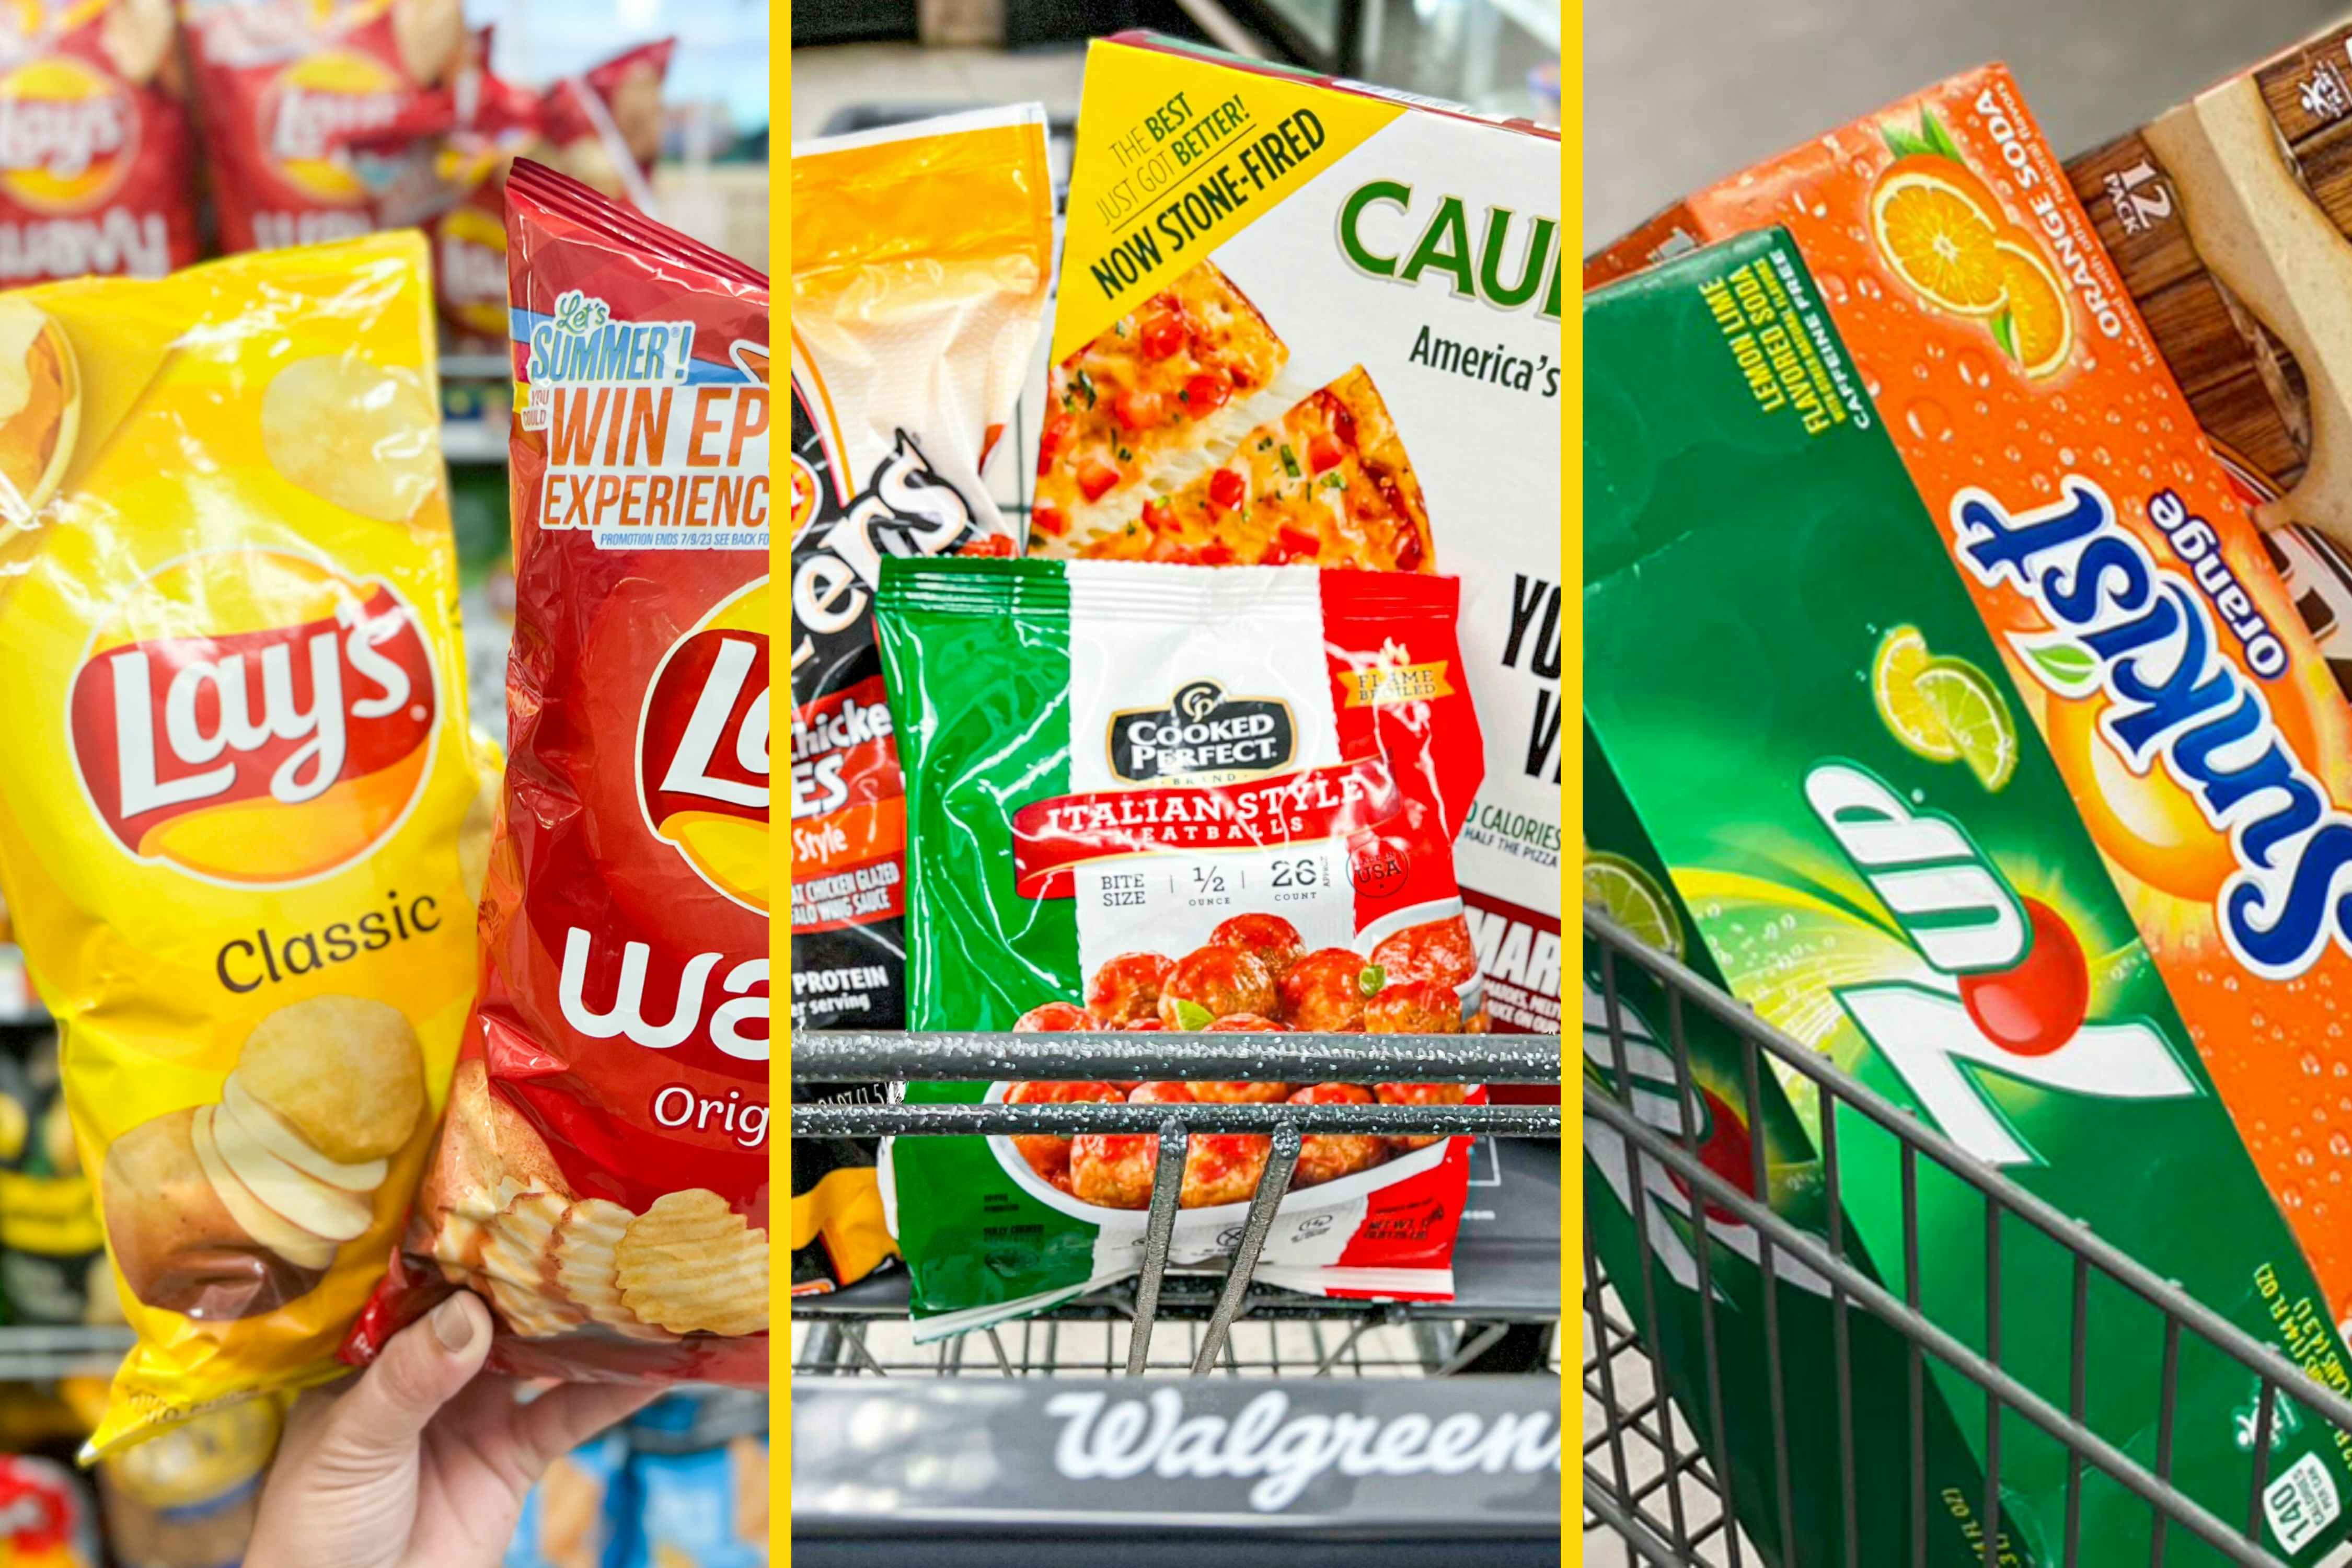 Best Coupon Deals This Week: $1.90 Chips, $3.66 Soda, and More